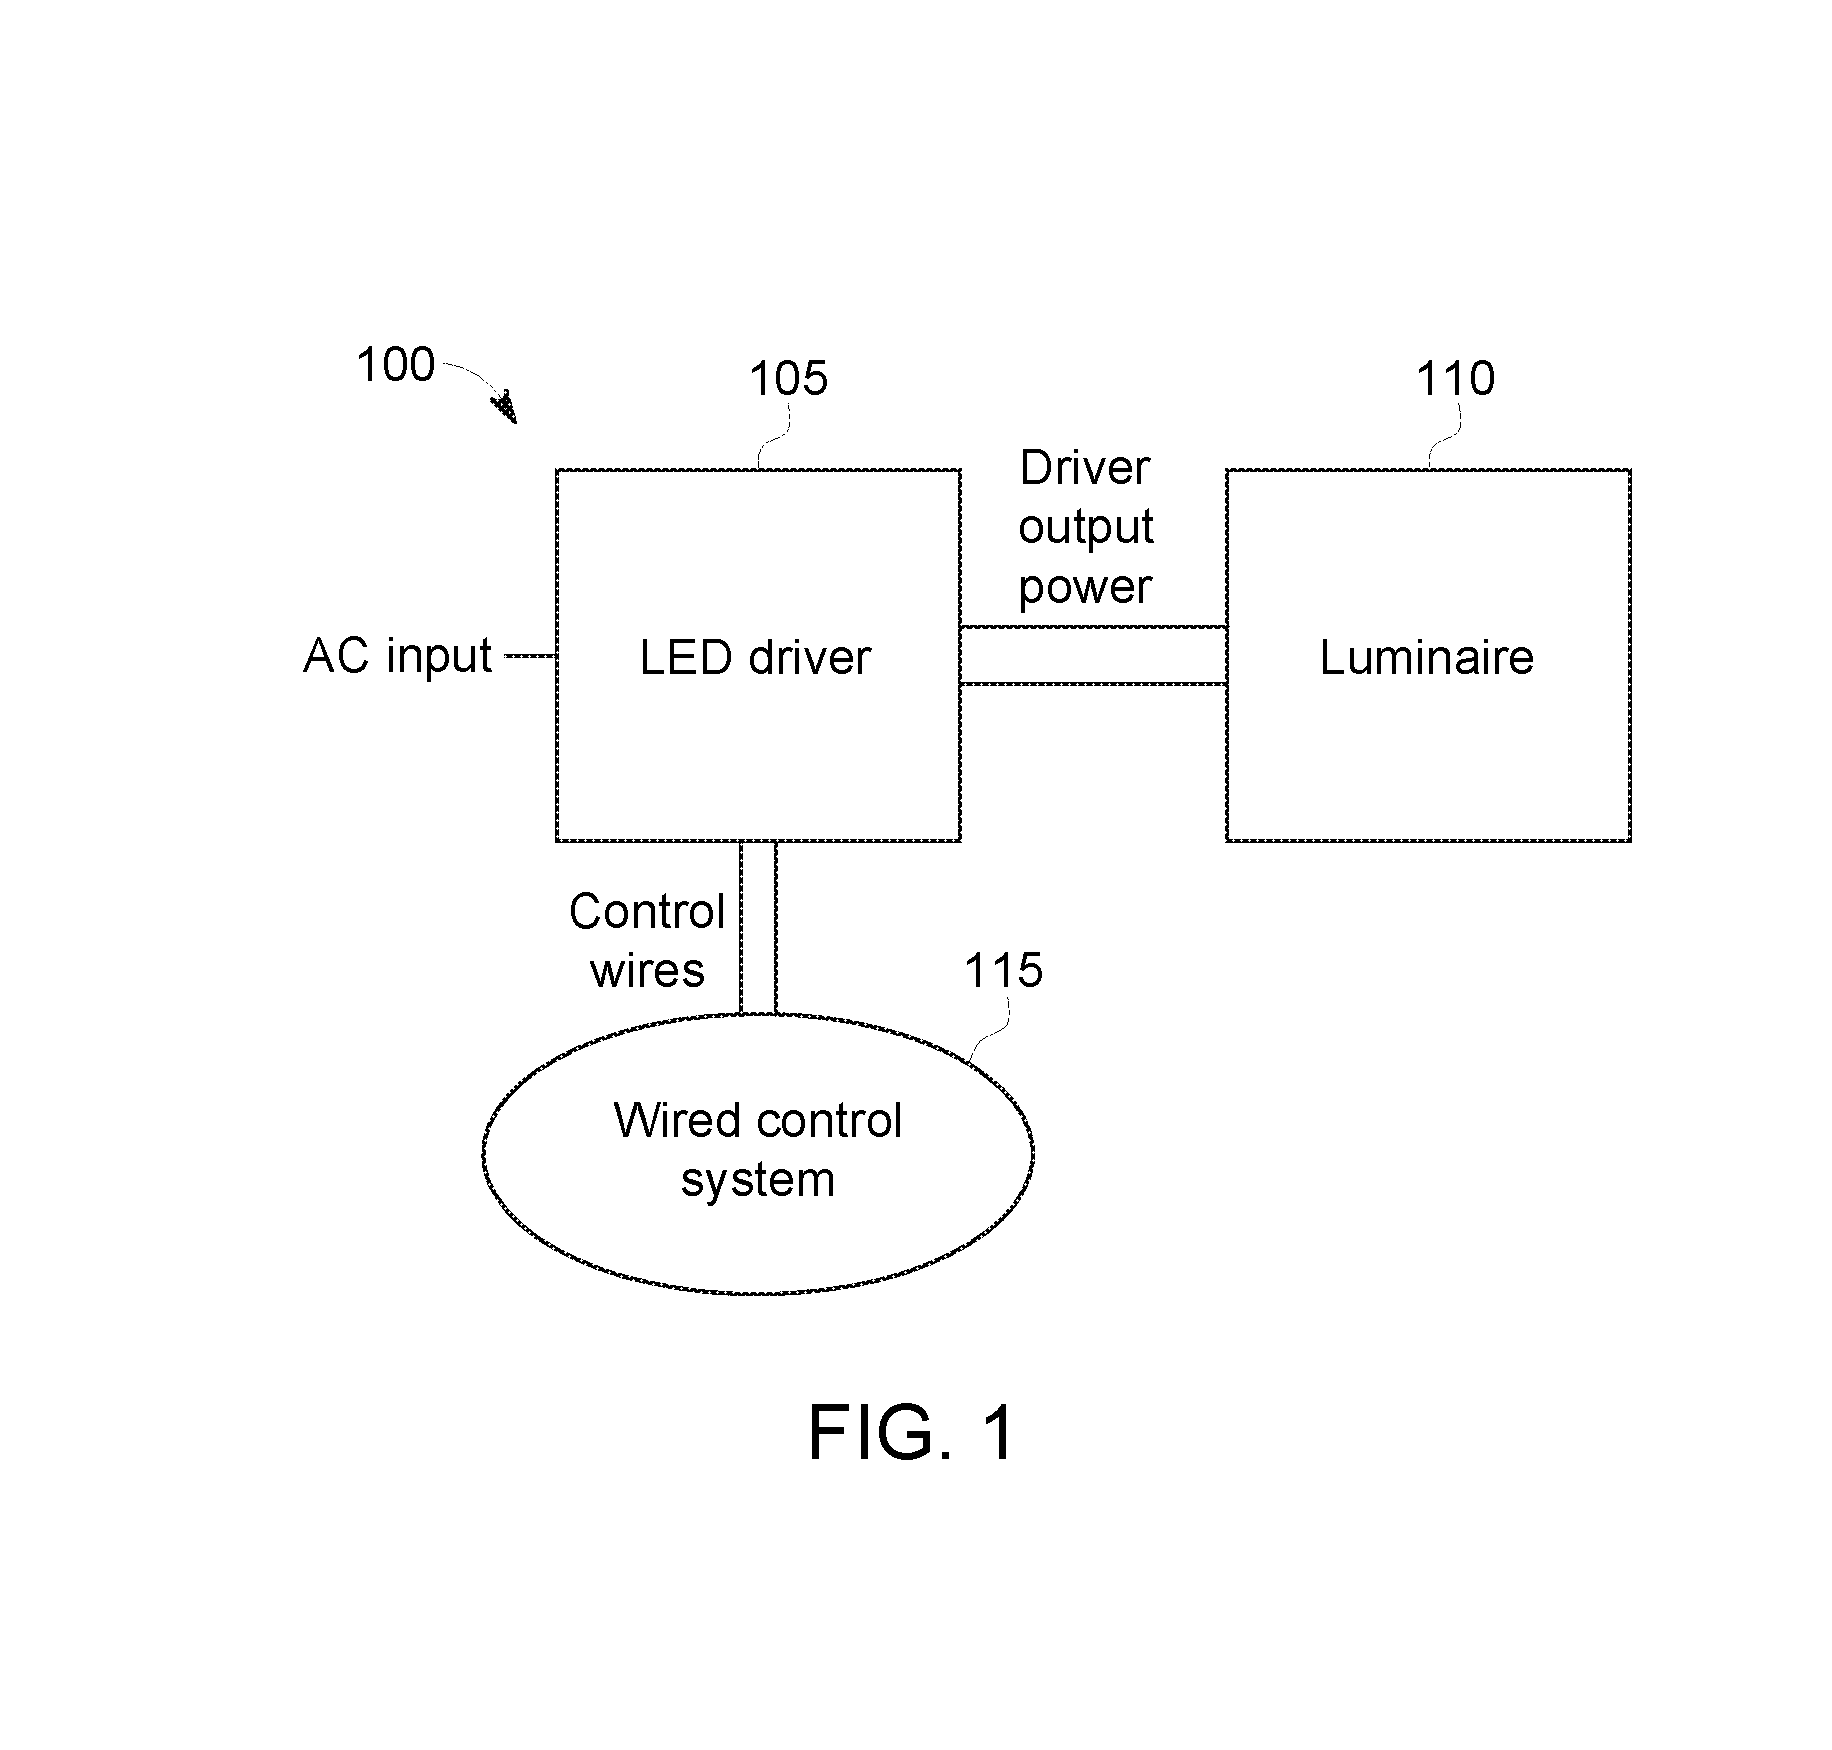 Method and system for lighting interface messaging with reduced power consumption